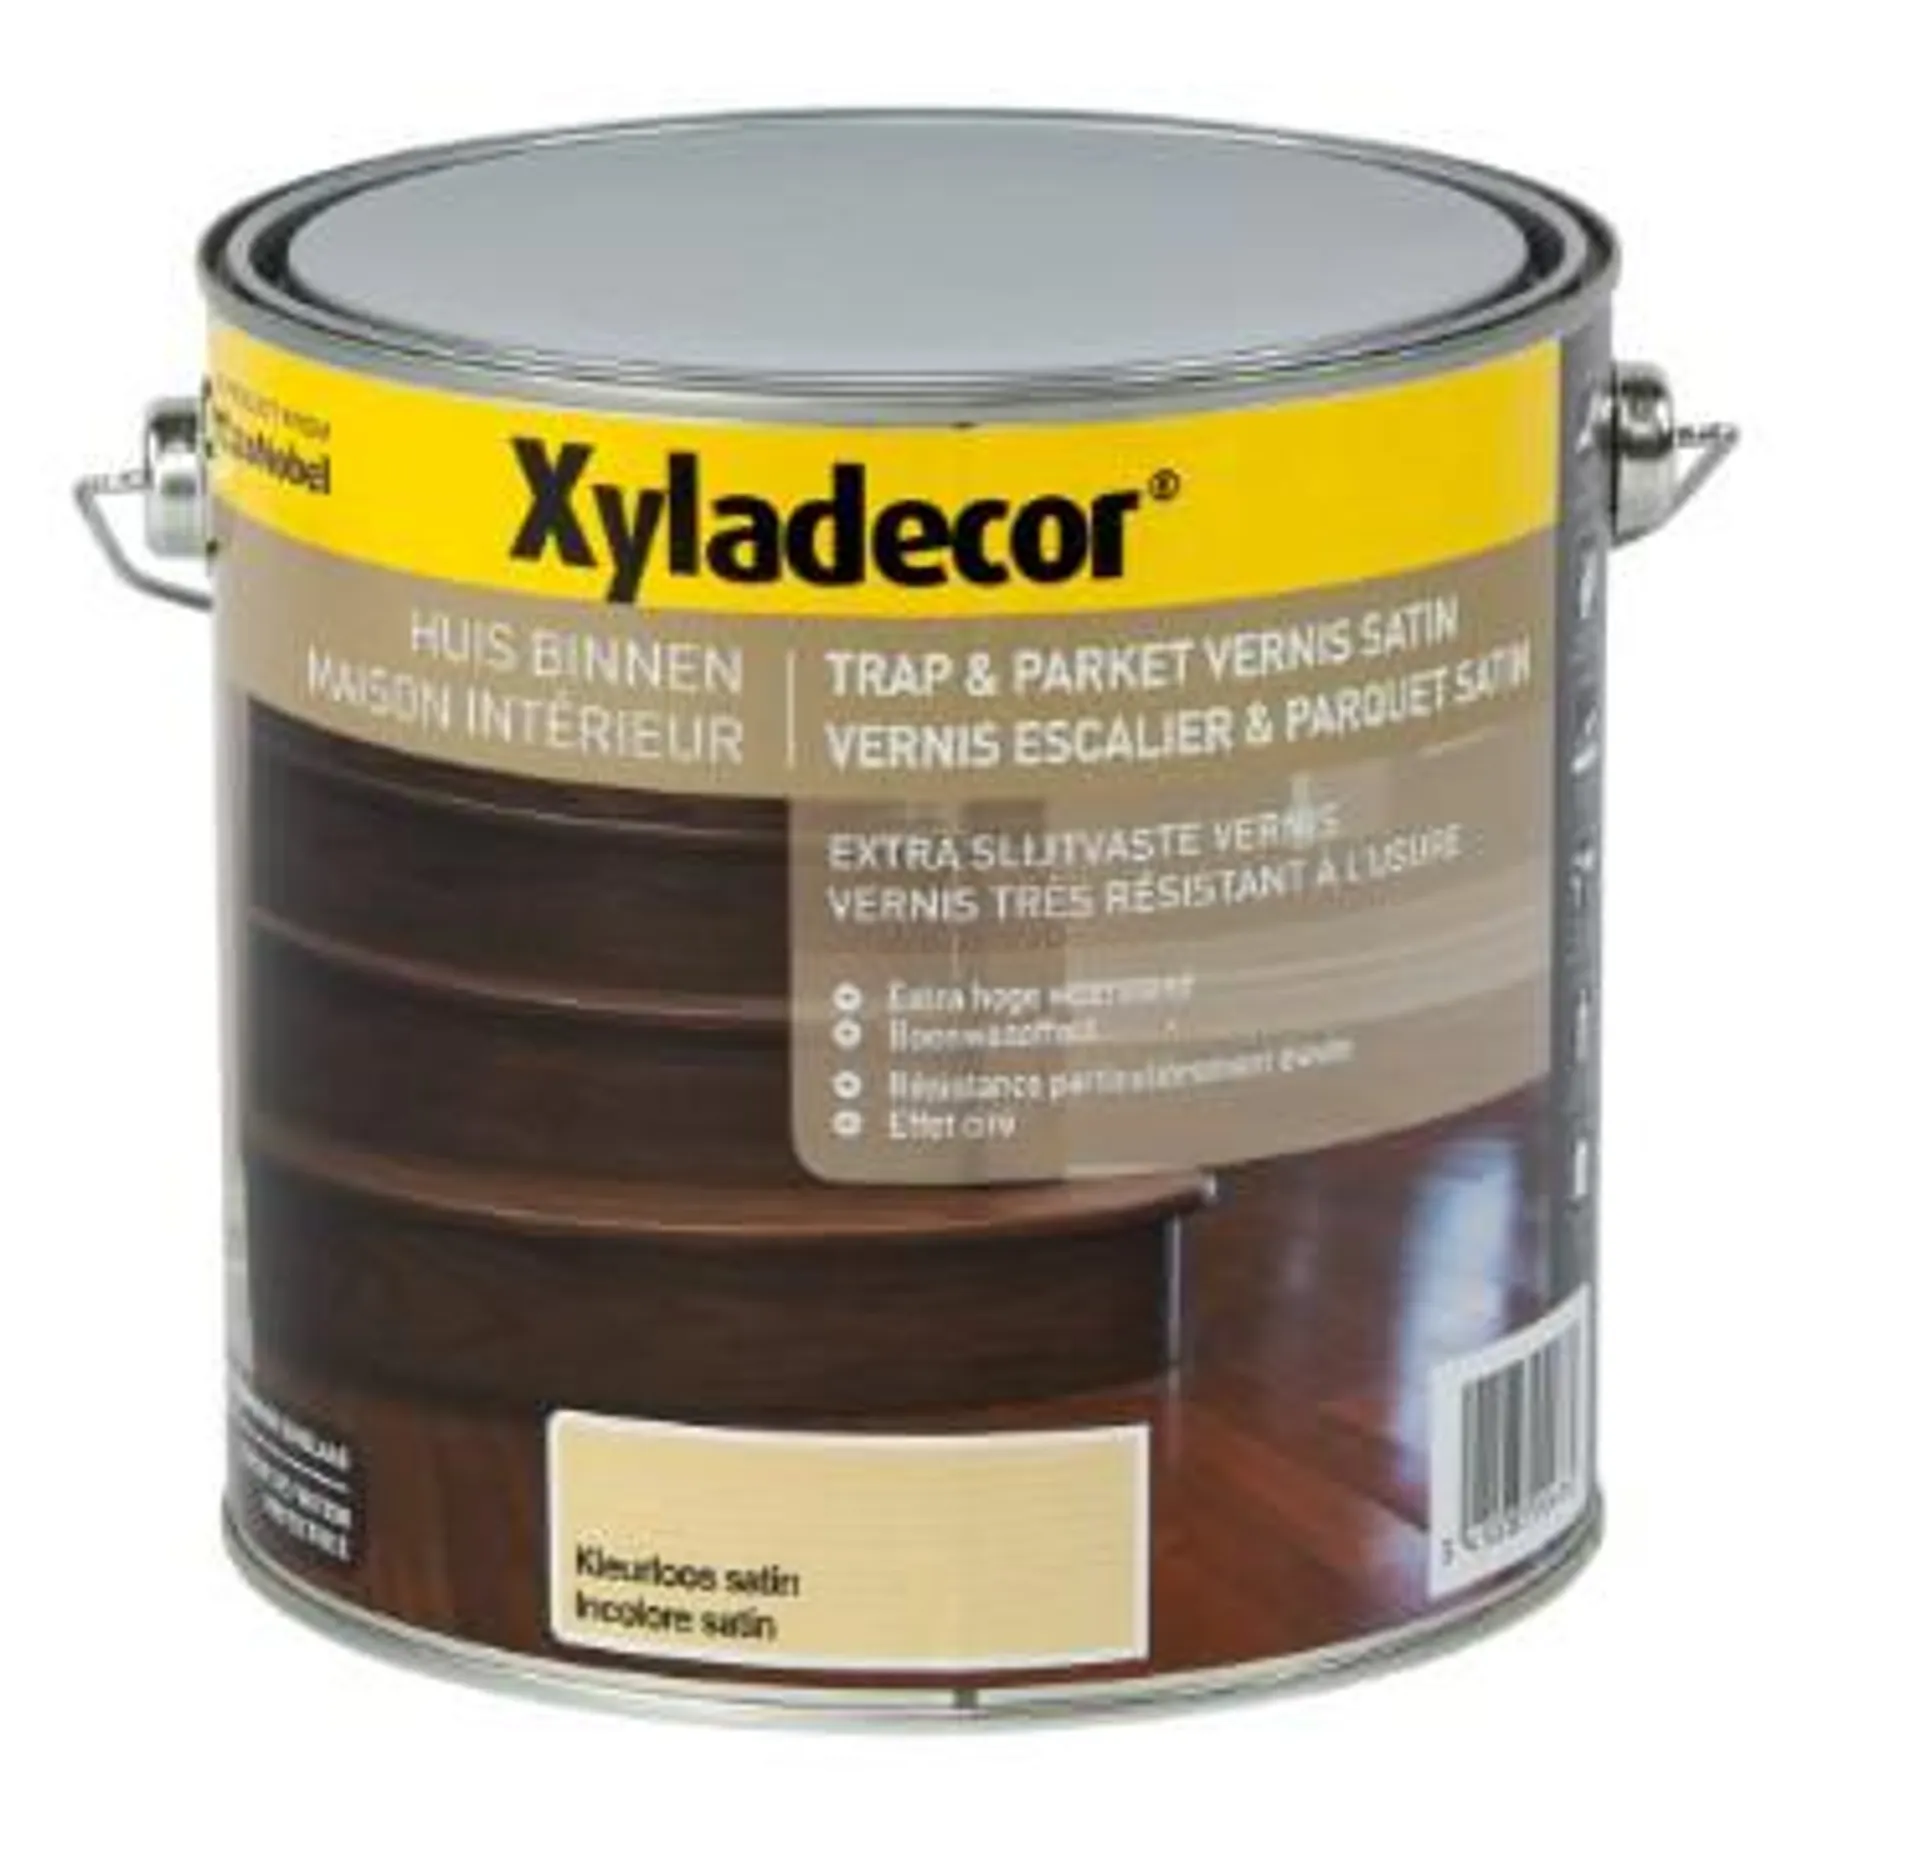 XYLADECOR PARKET VERNIS EXTRA PROTECT S 2.5L